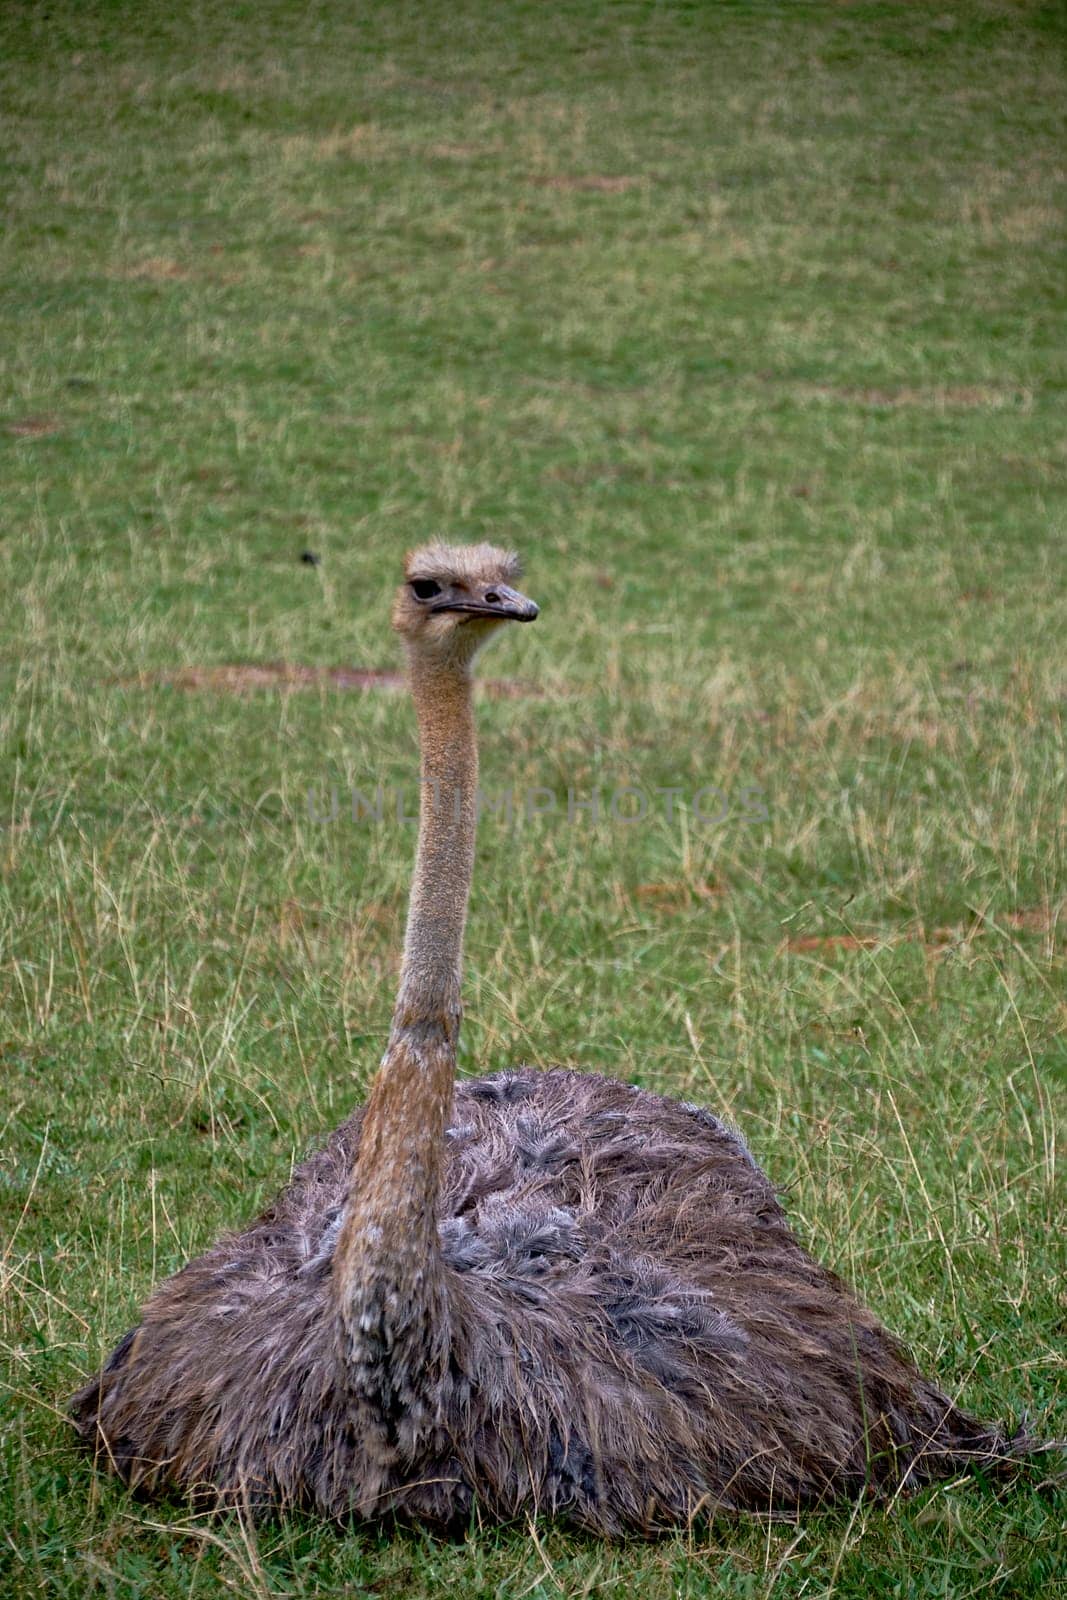 A solitary ostrich sitting in a meadow.Details , quietness, front view, grass, foliage, long neck beak